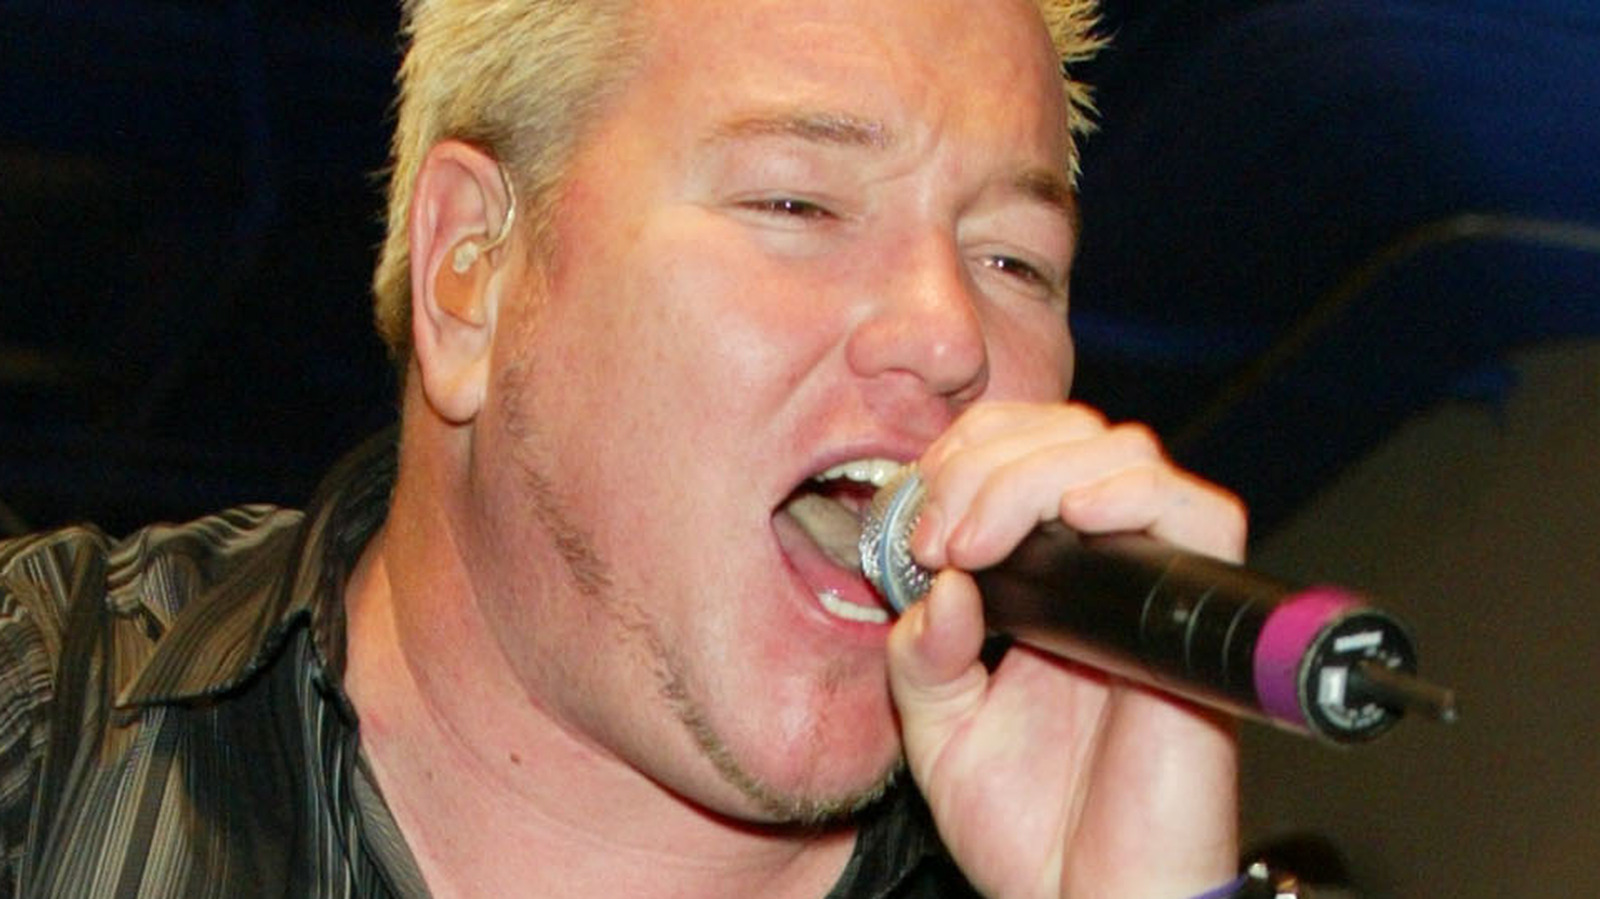 The Never-ending Life of Smash Mouth's “All Star” - The Ringer